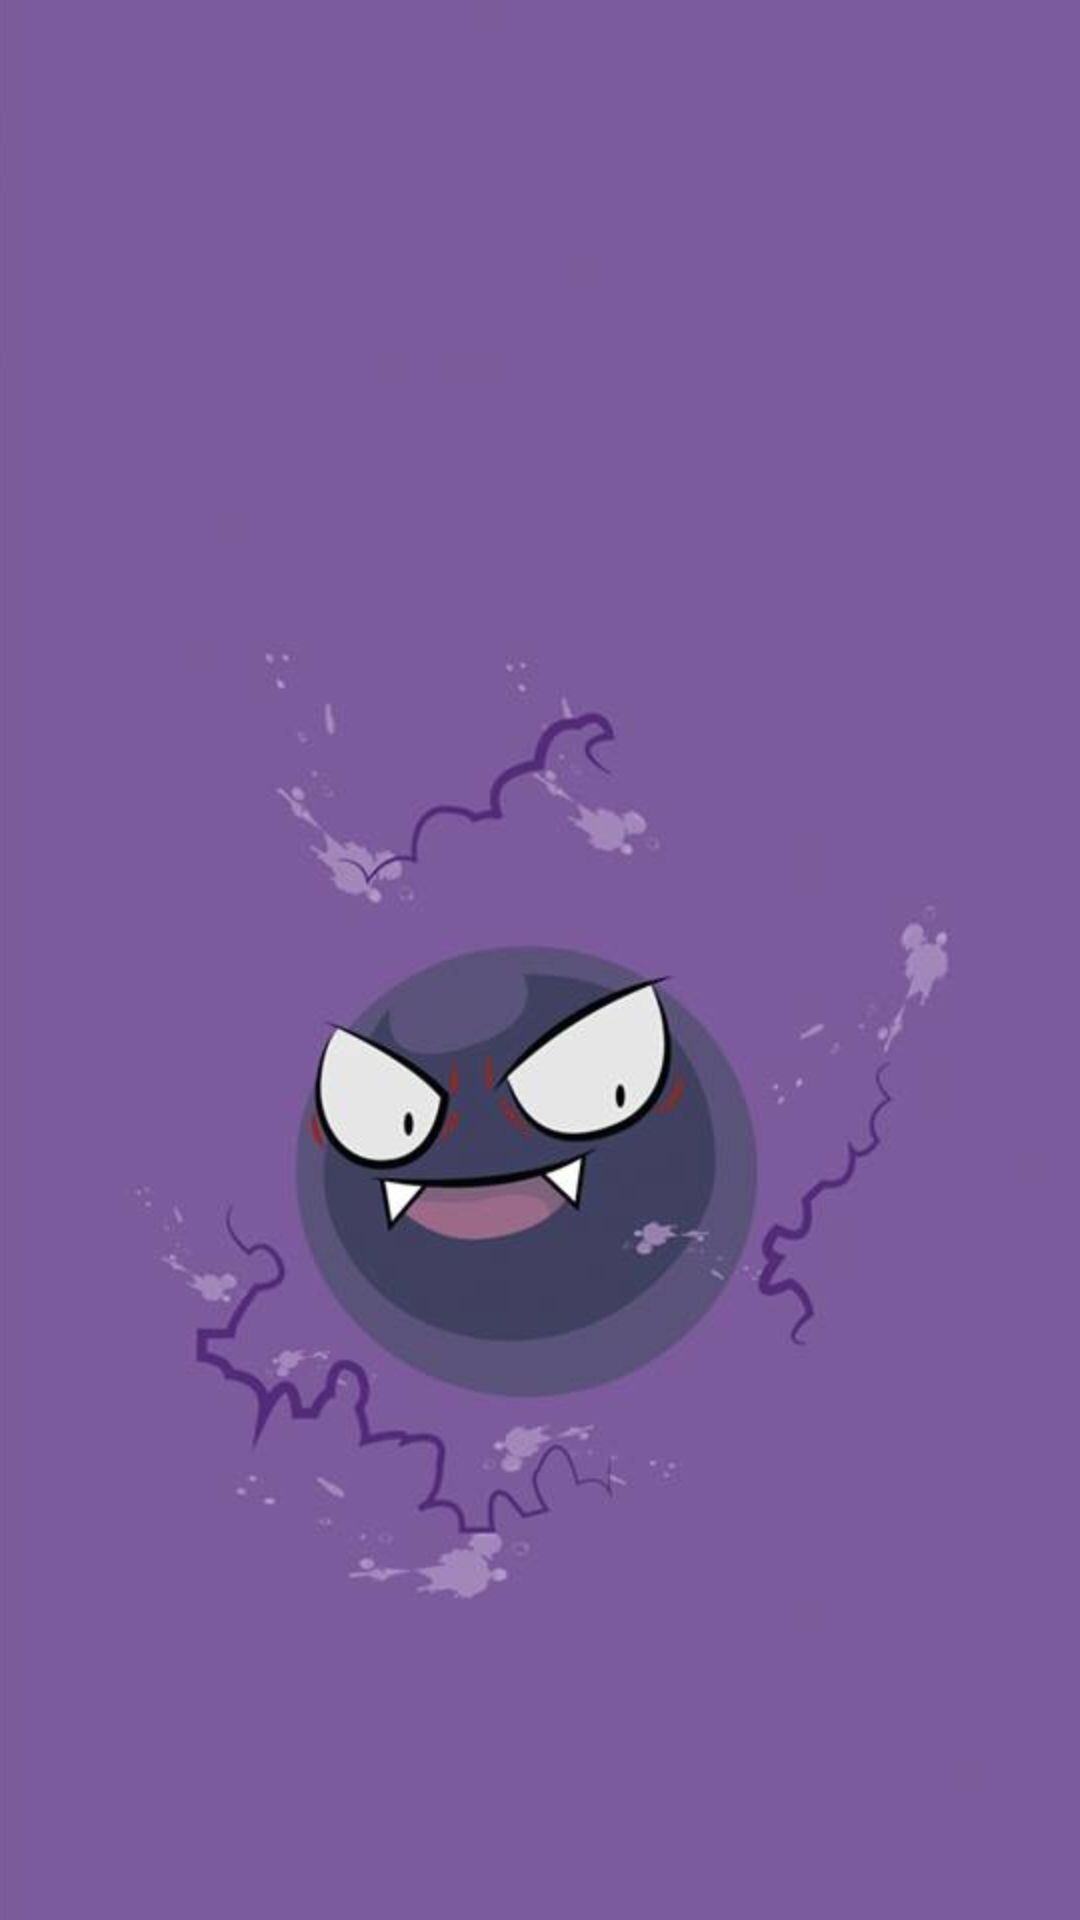 Ghost Pokemon: Gastly, can envelop an opponent of any size and cause suffocation. 1080x1920 Full HD Wallpaper.